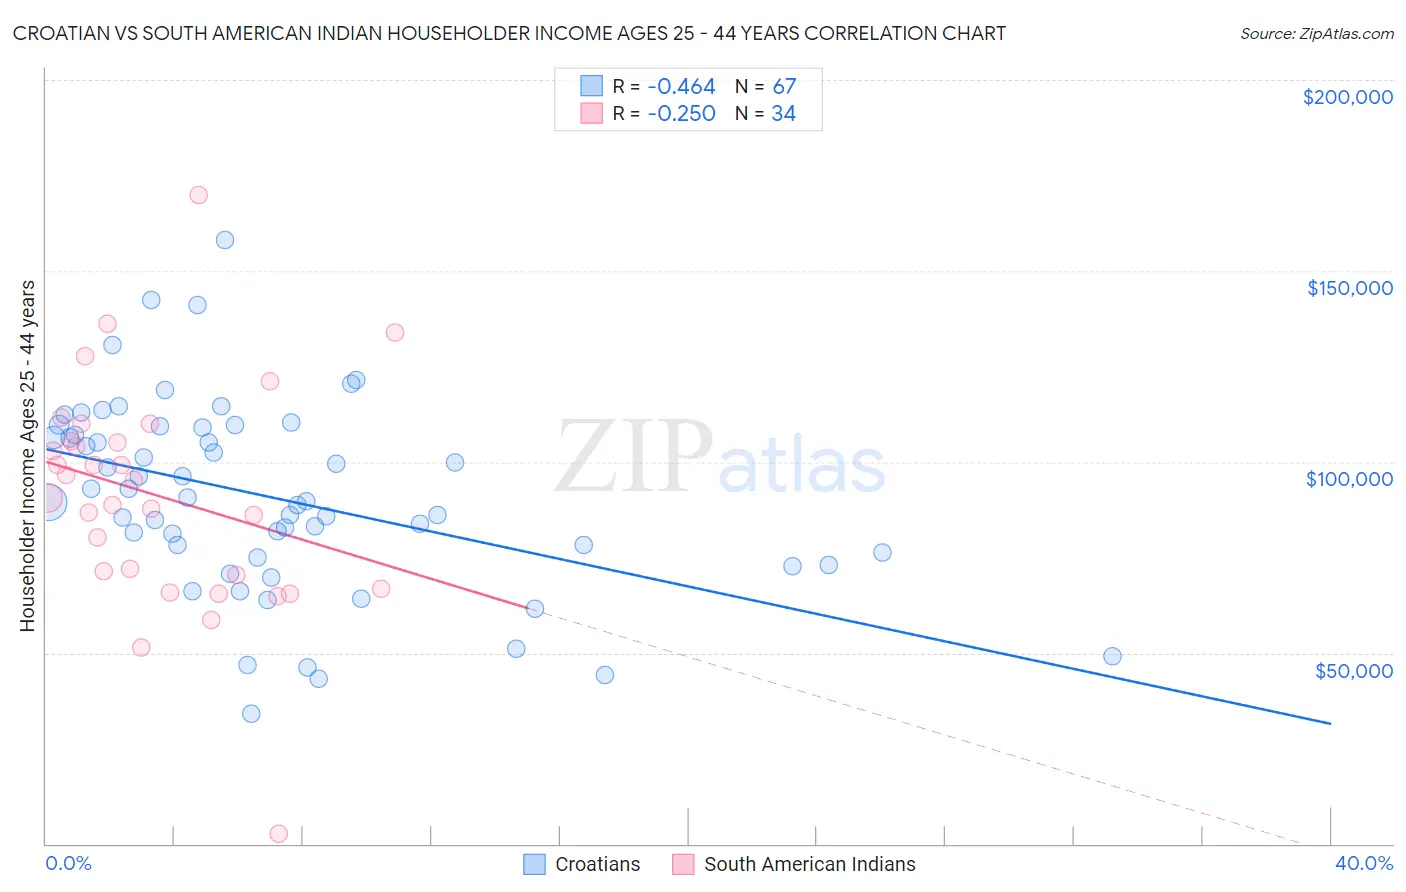 Croatian vs South American Indian Householder Income Ages 25 - 44 years